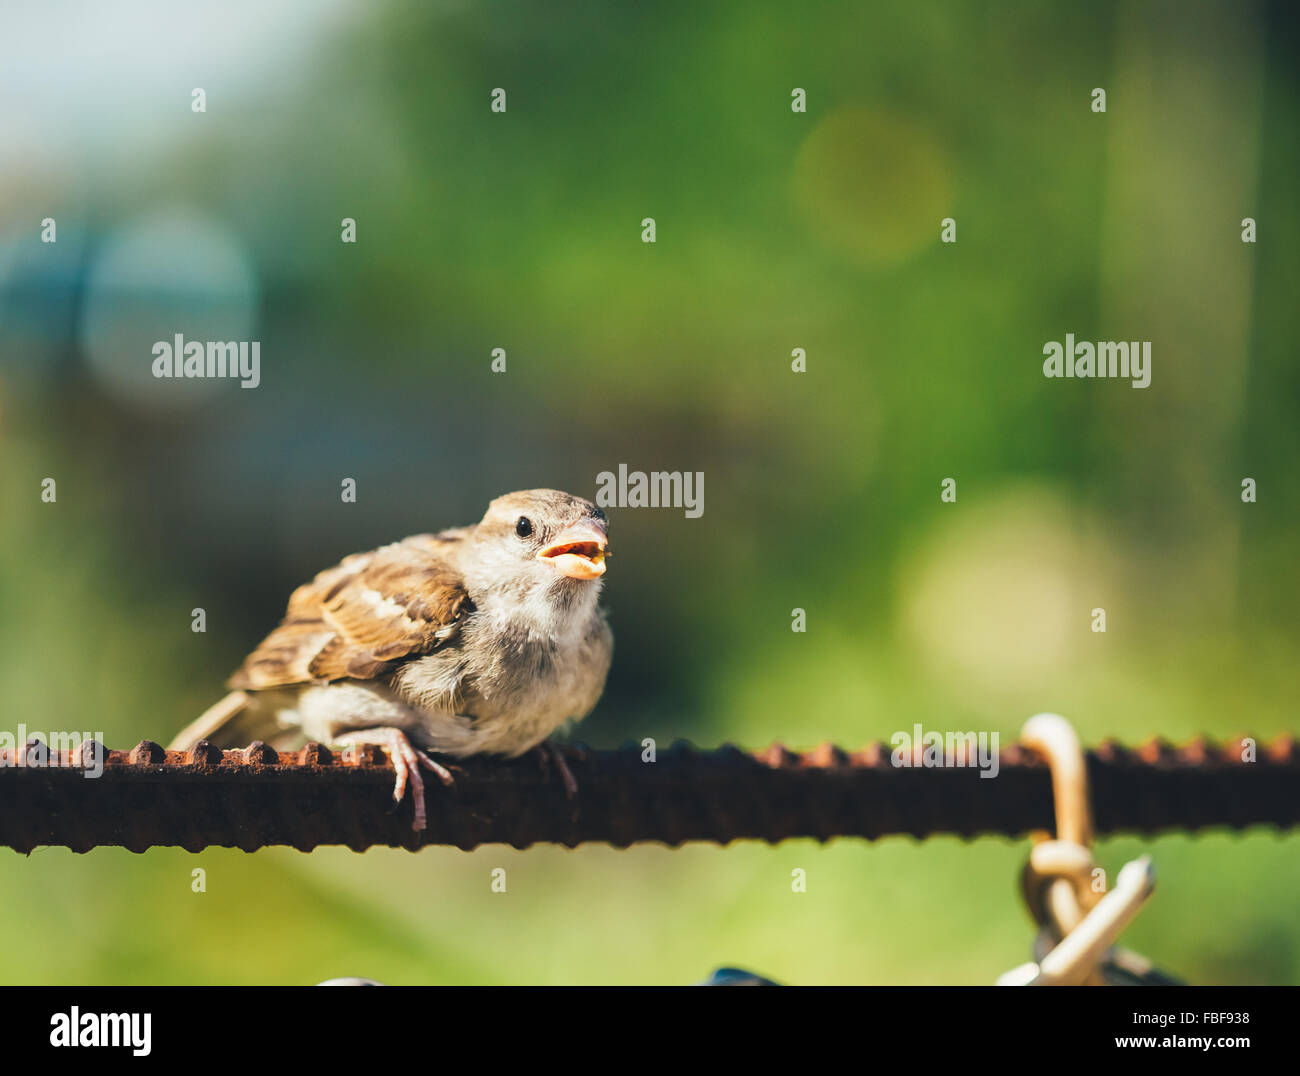 Young Bird Nestling House Sparrow Chick Baby Yellow-Beaked (Passer Domesticus) Sitting On Fence Stock Photo